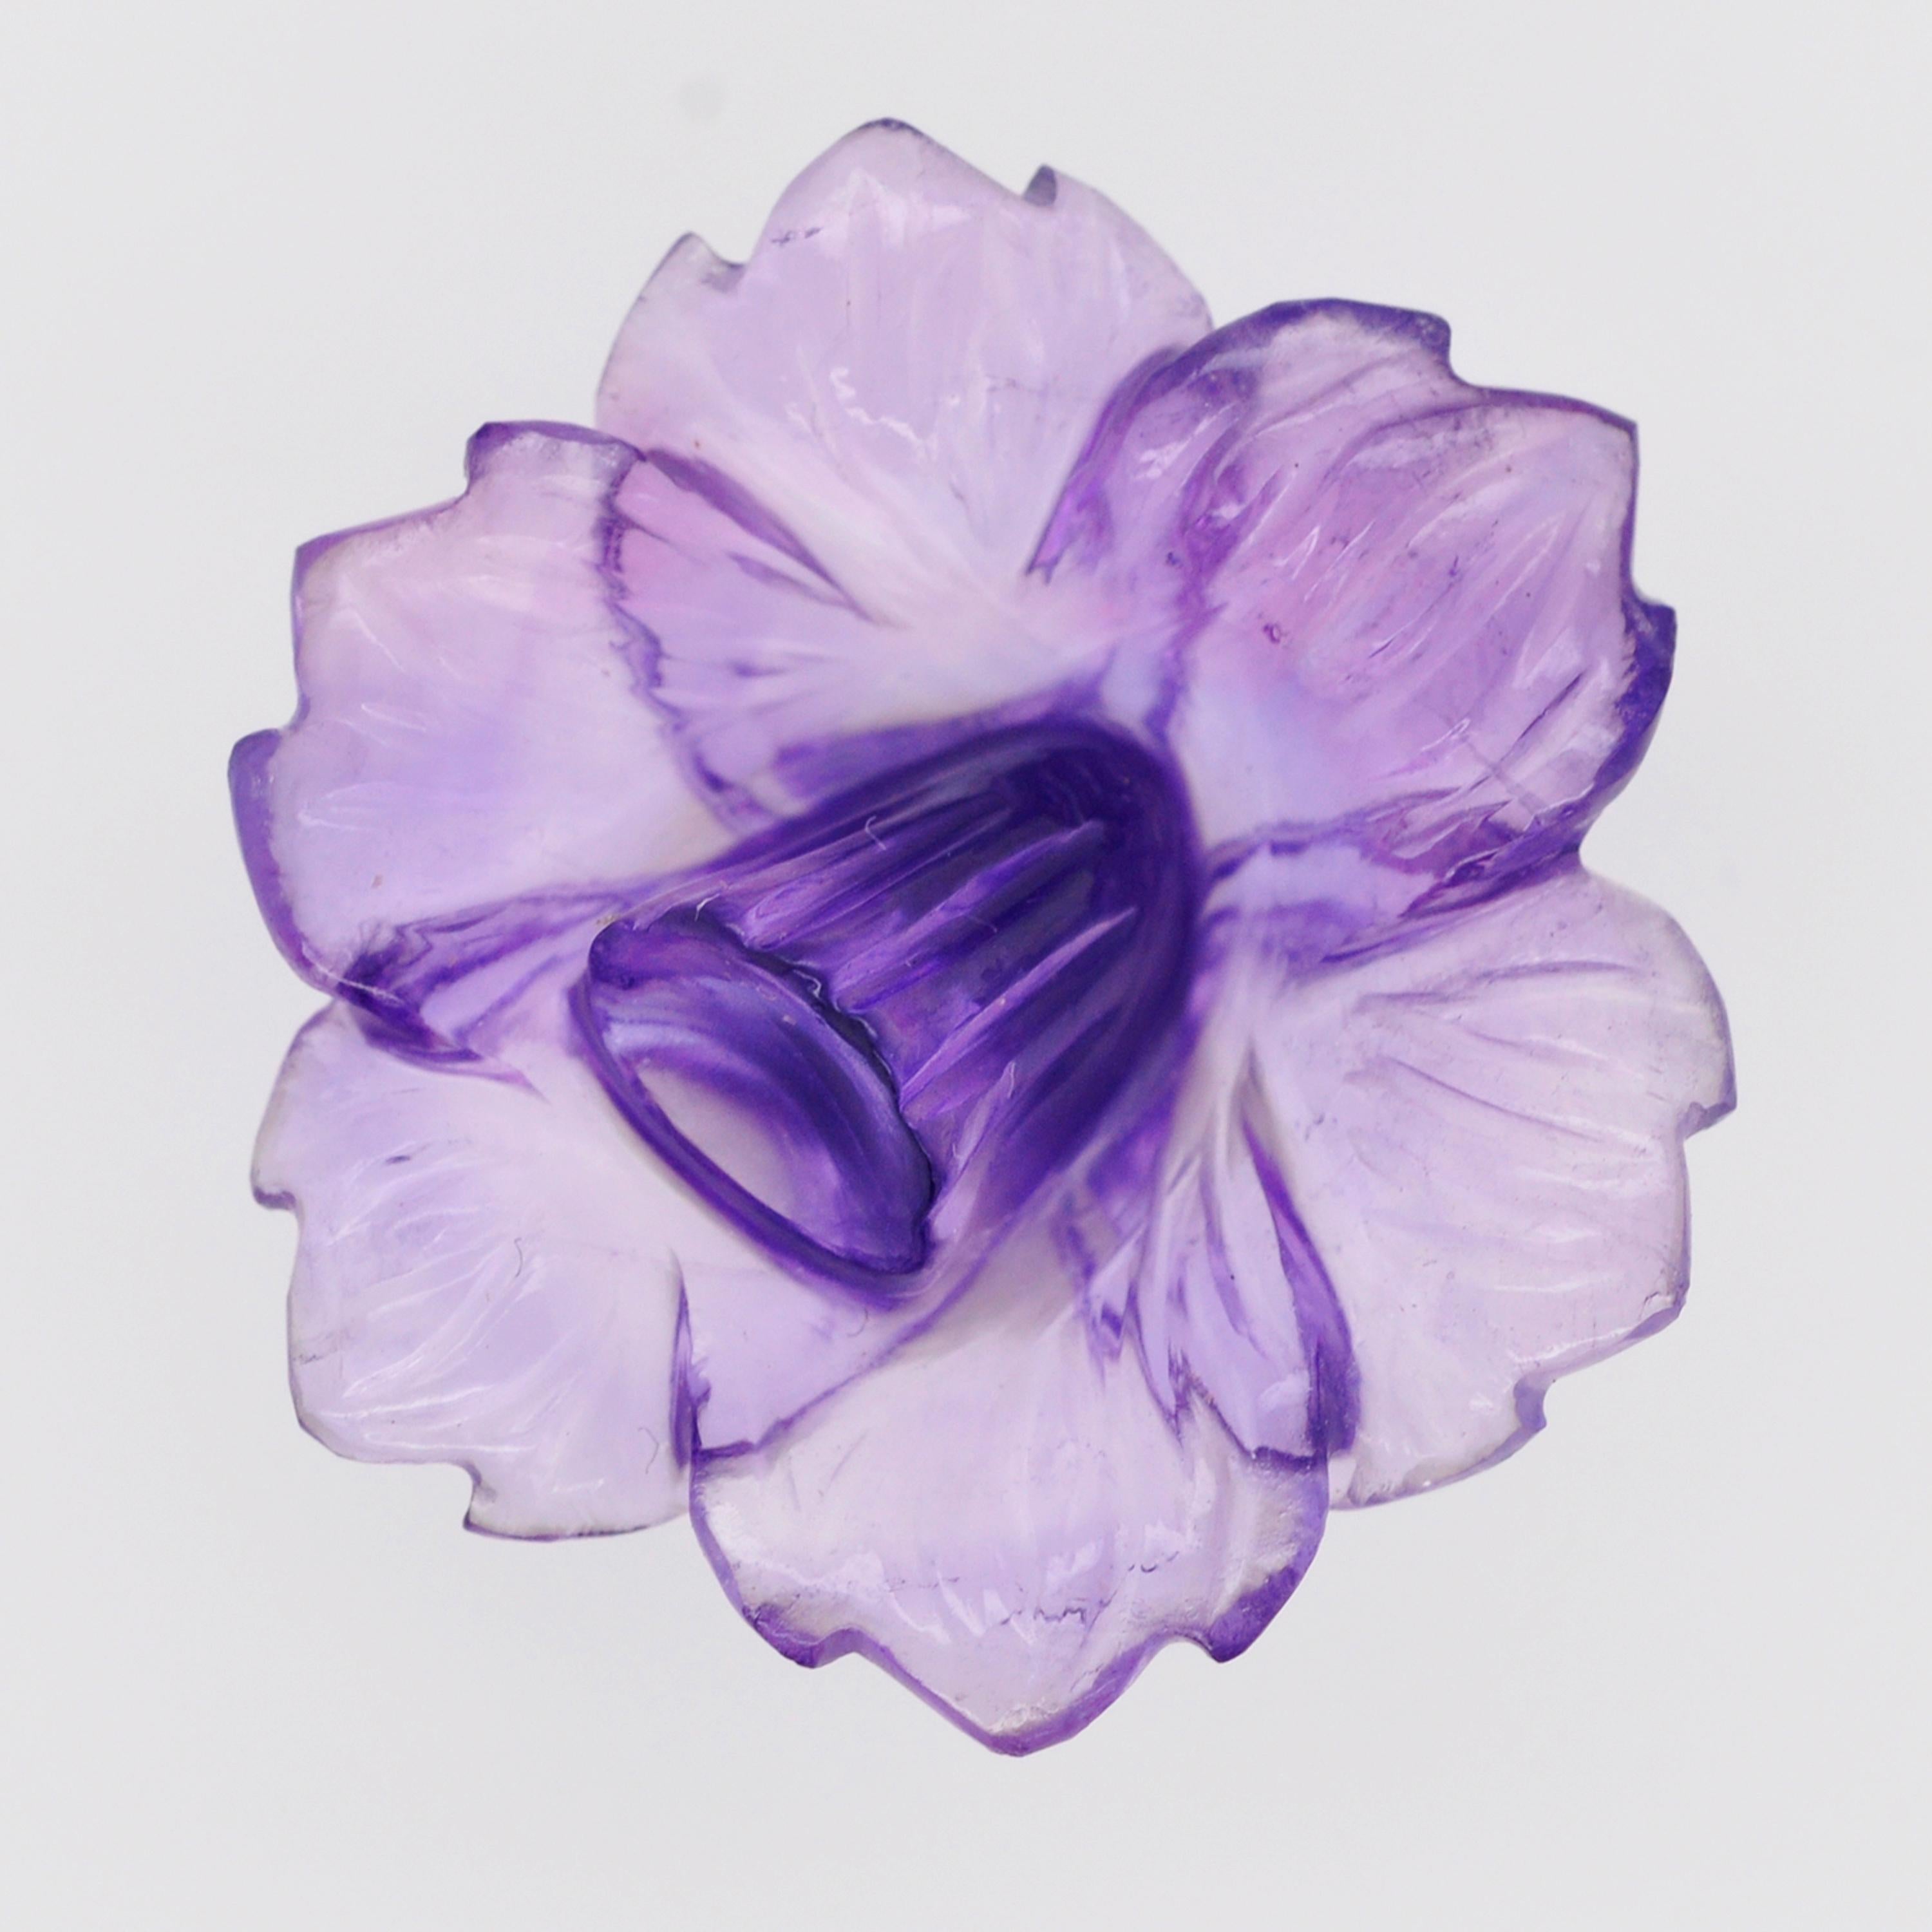 Our hand-carved 15.13 carat African Amethyst Daffodil Flower Loose Gemstone is a breathtaking work of art meticulously crafted by our expert lapidary artist in Jaipur. With exceptional skill and attention to detail, the lapidary artist has